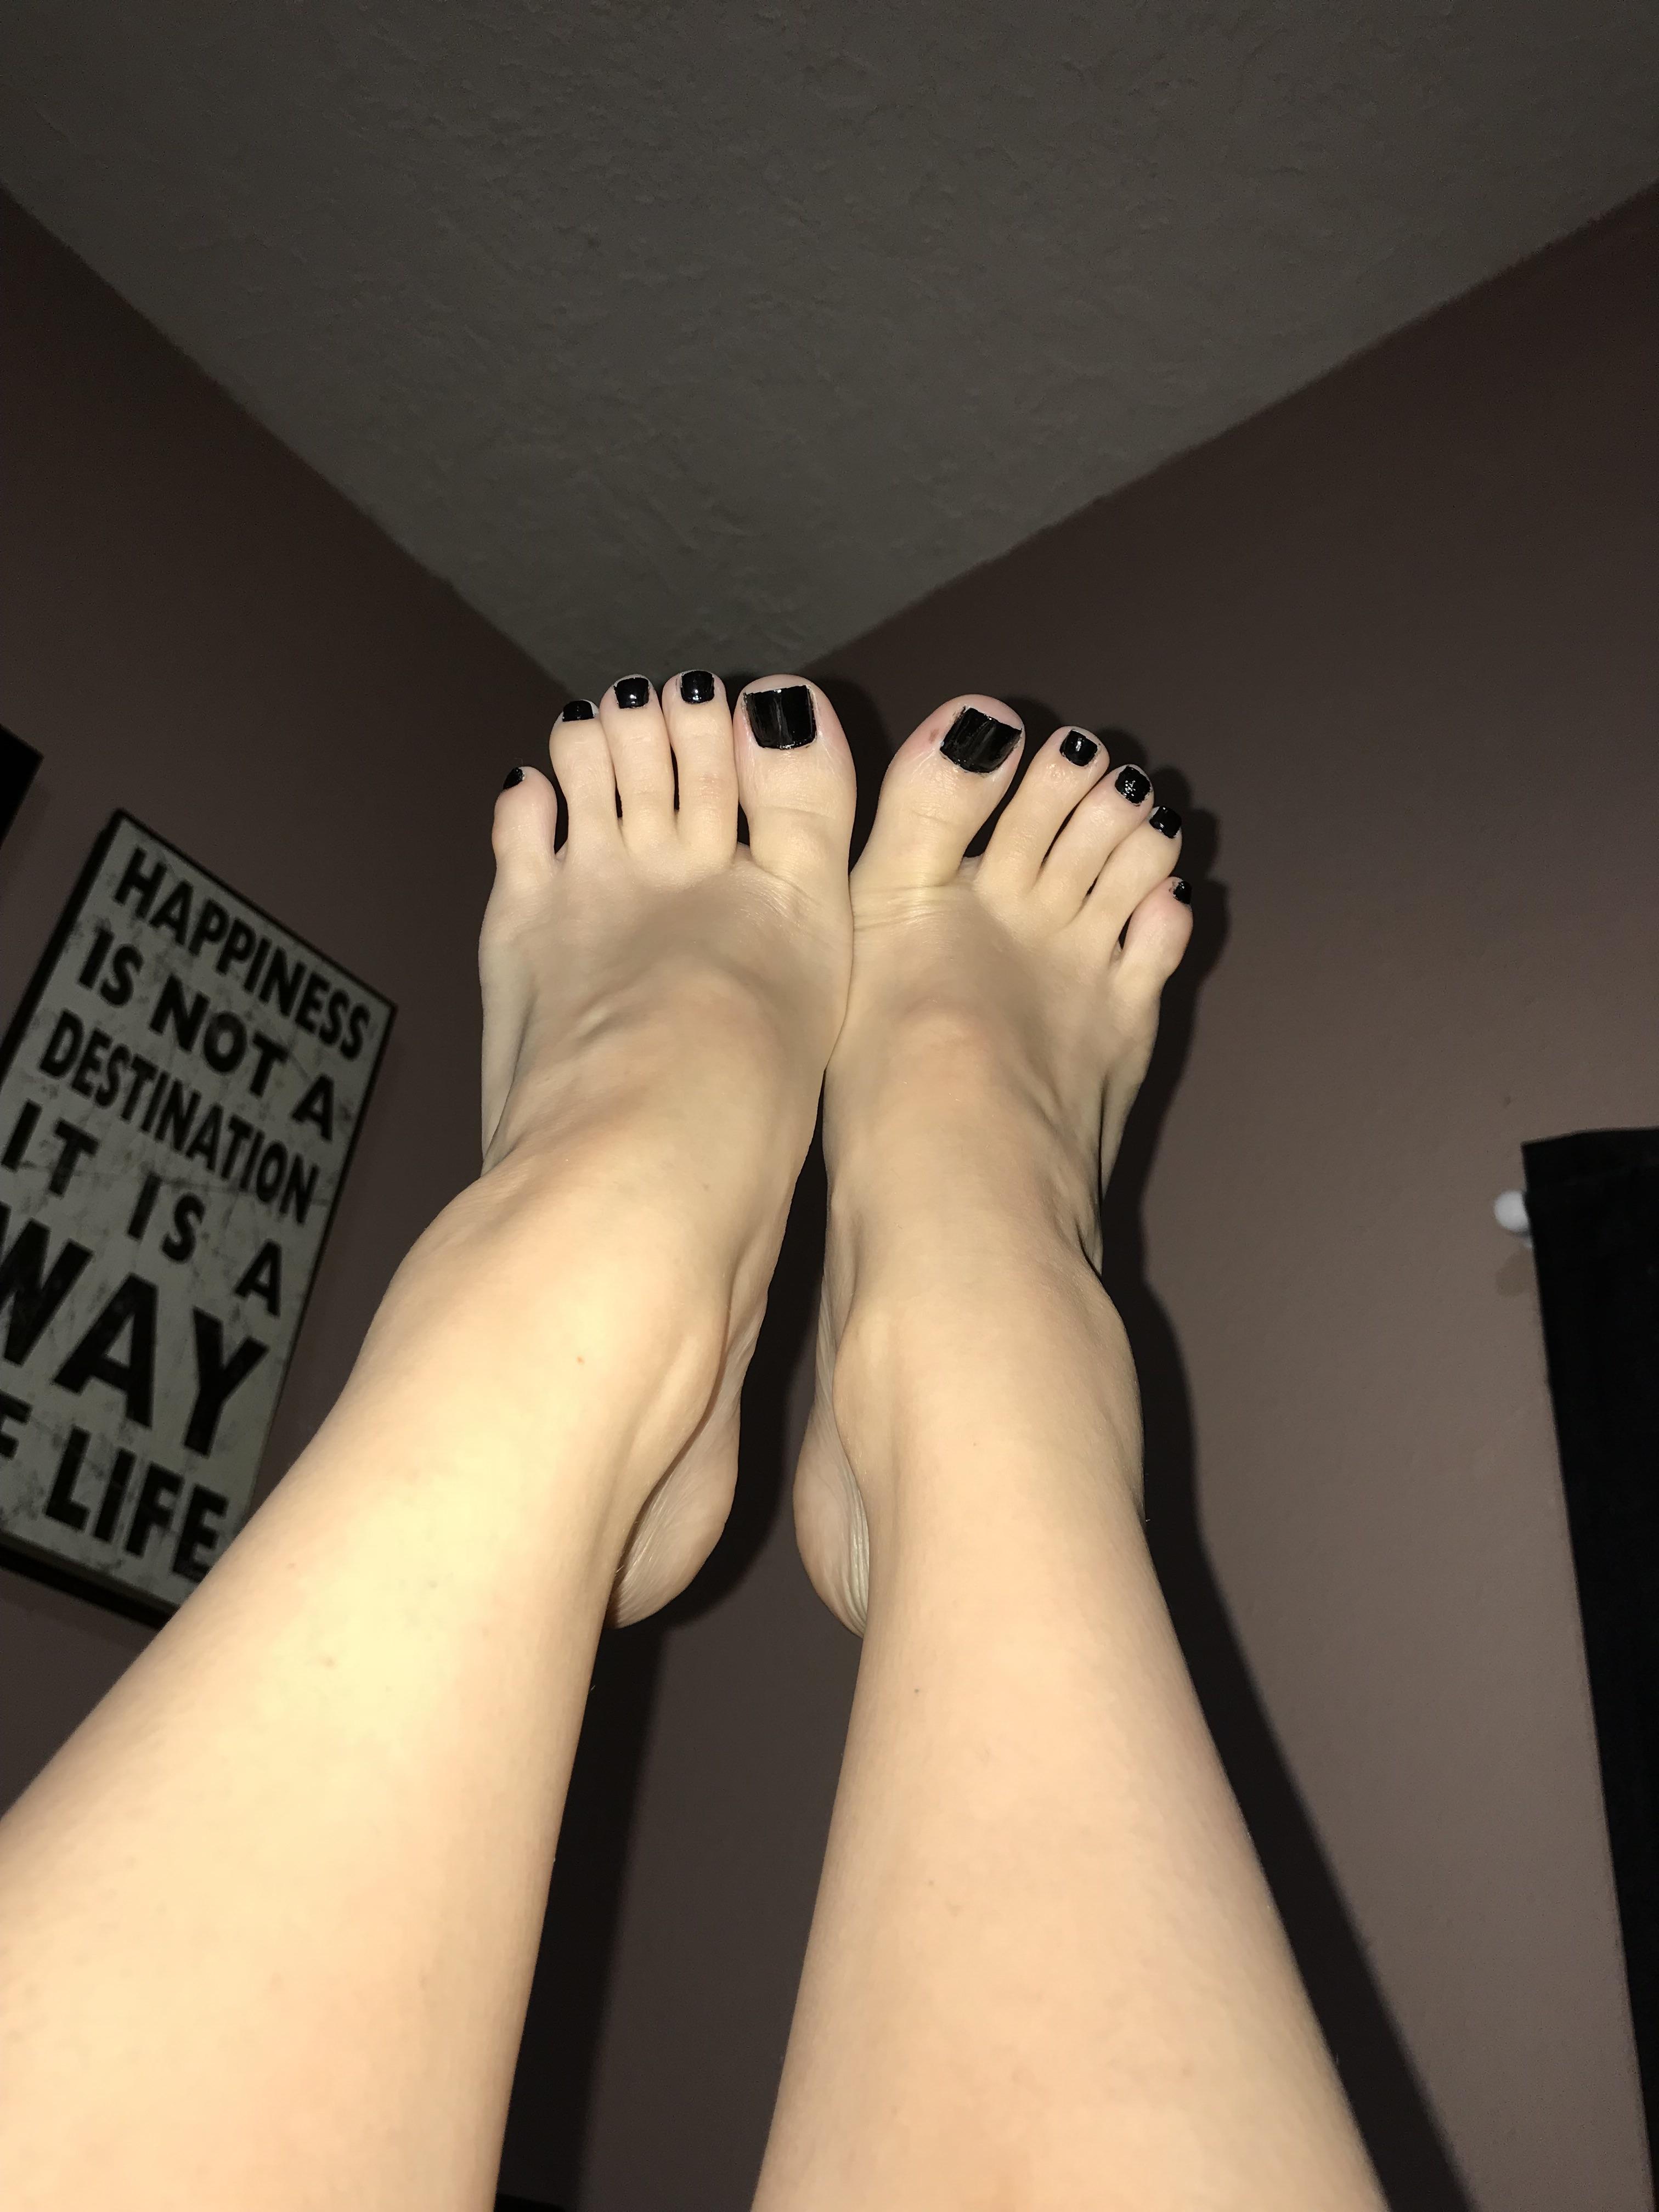 Don’t think I’ve ever posted on this sub so here’s my black toes in the air!